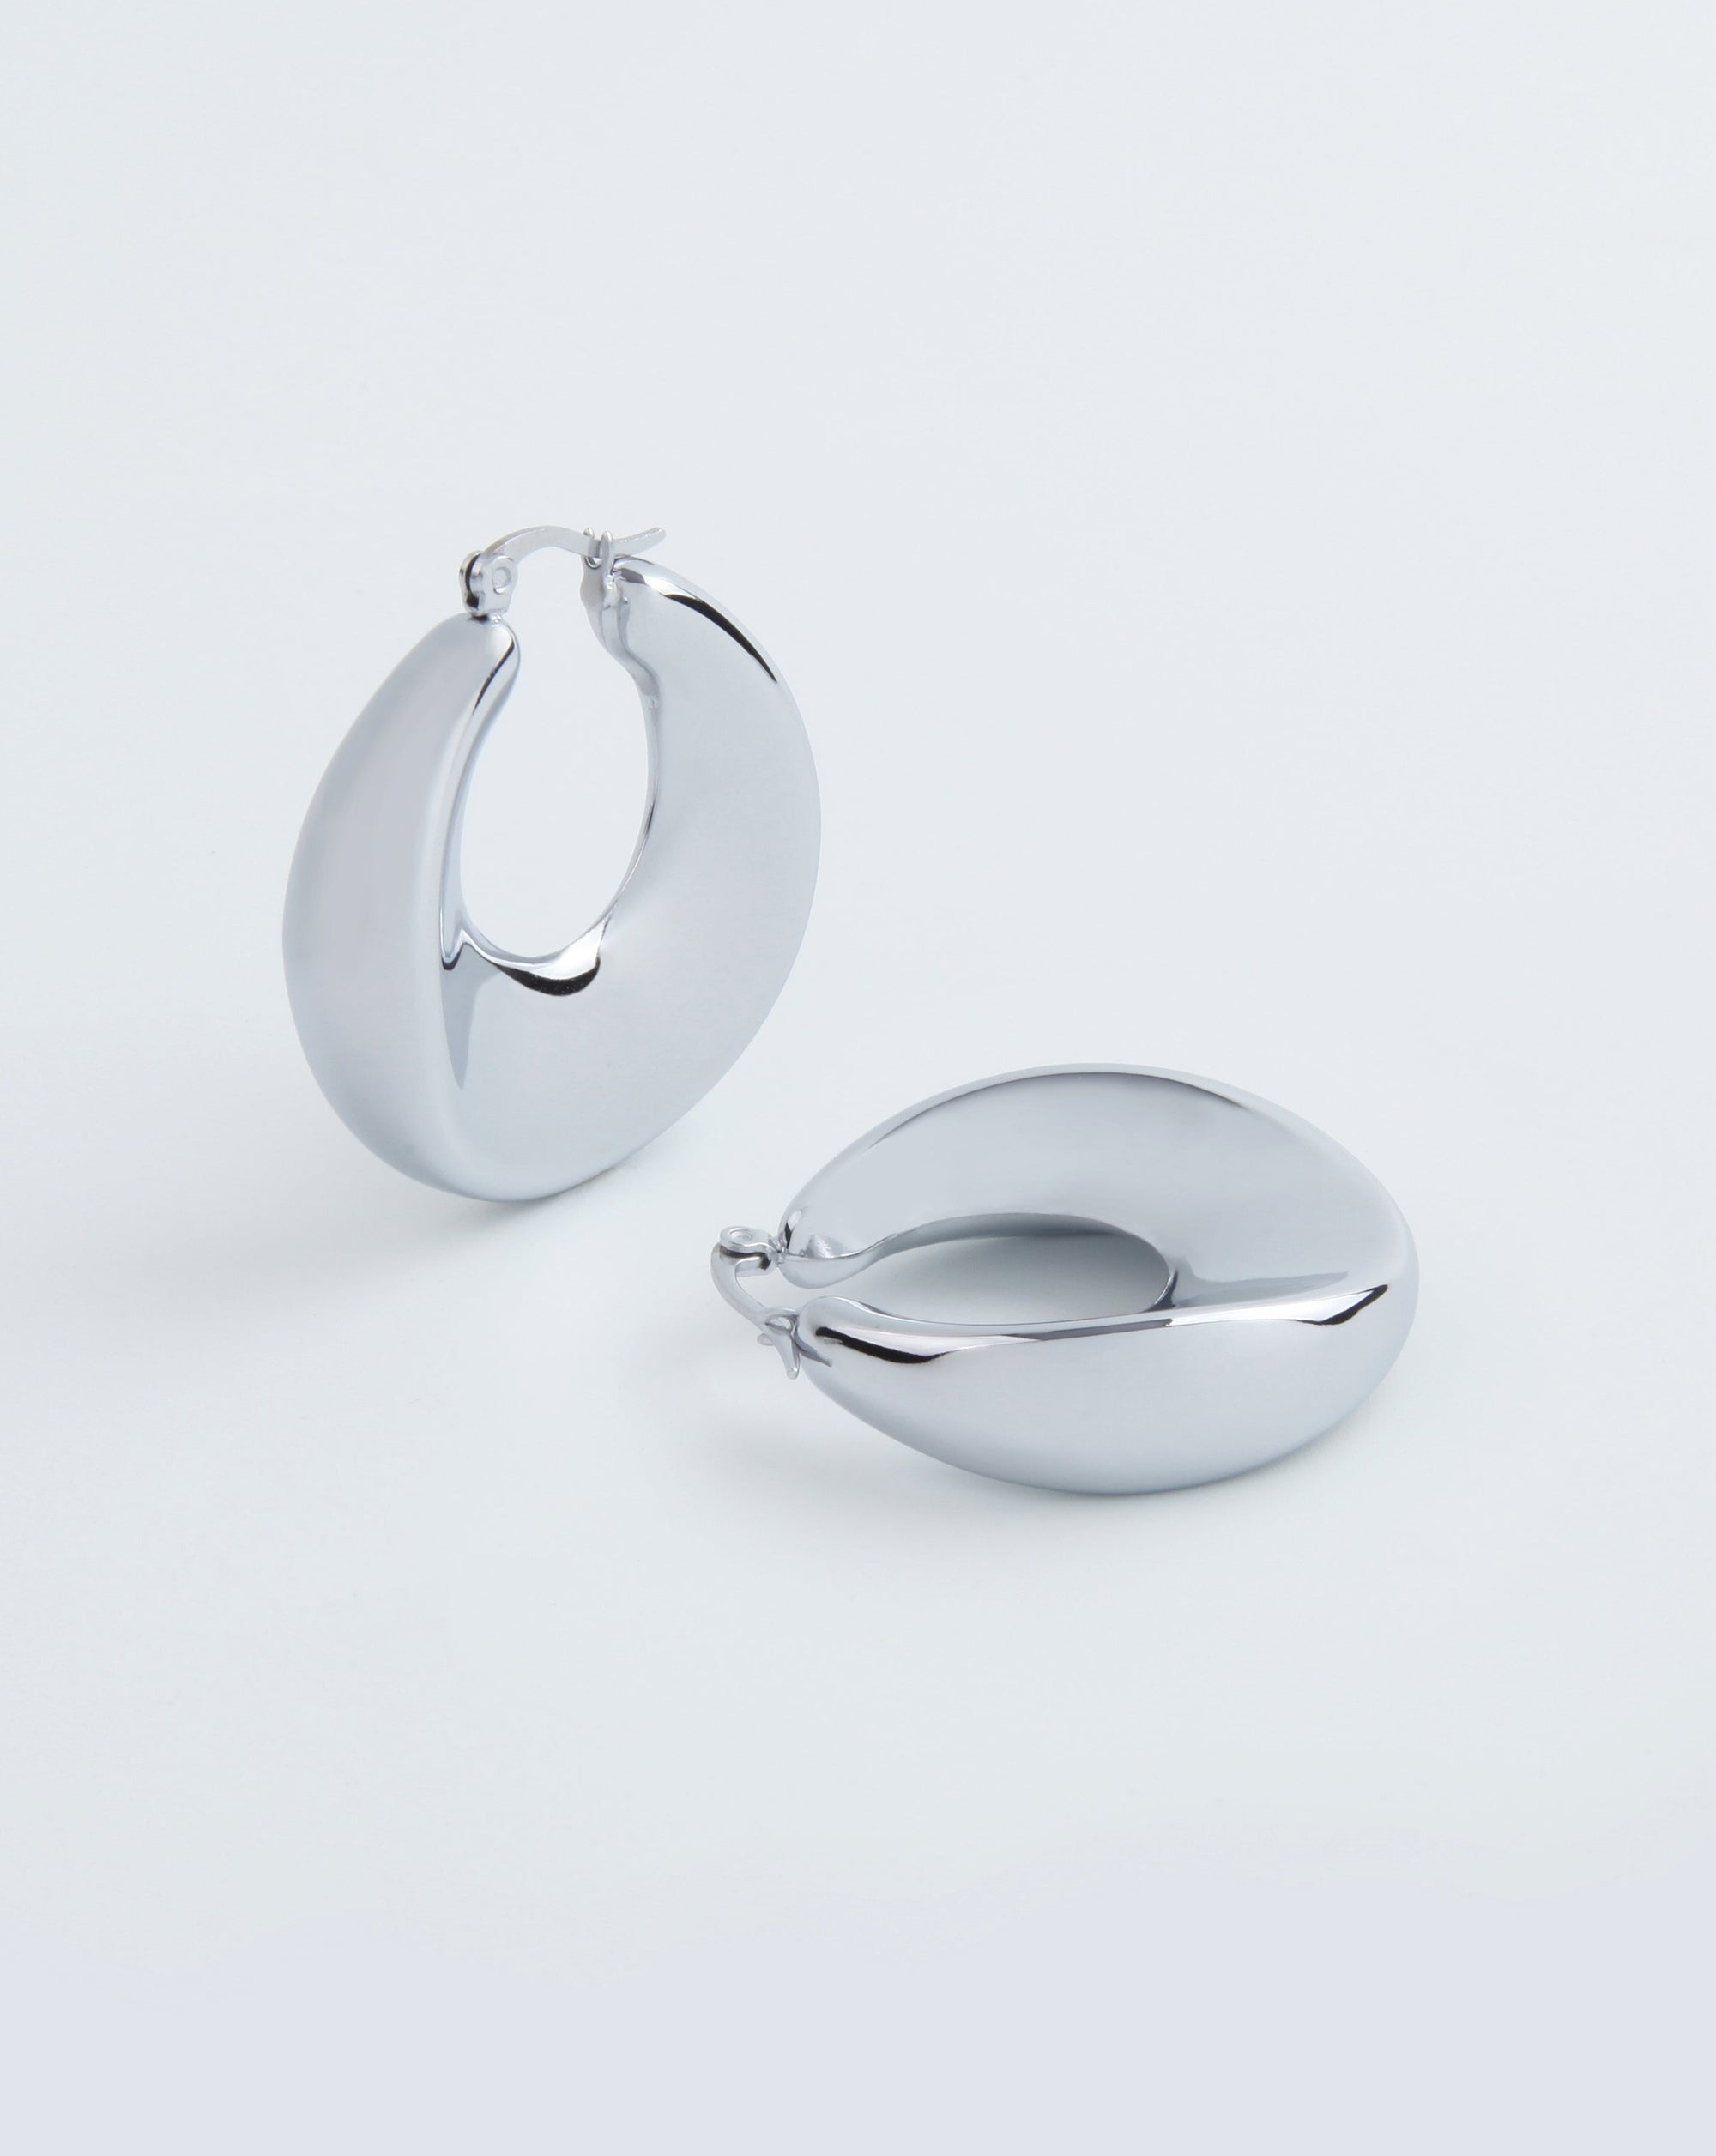 A pair of shiny, smooth, 18kt gold-plated hoop earrings are displayed against a plain white background. One earring stands upright, while the other lies flat, showcasing their sleek and polished design. Despite their luxurious appearance, these Moon Earrings Silver by For Art's Sake® are remarkably lightweight.